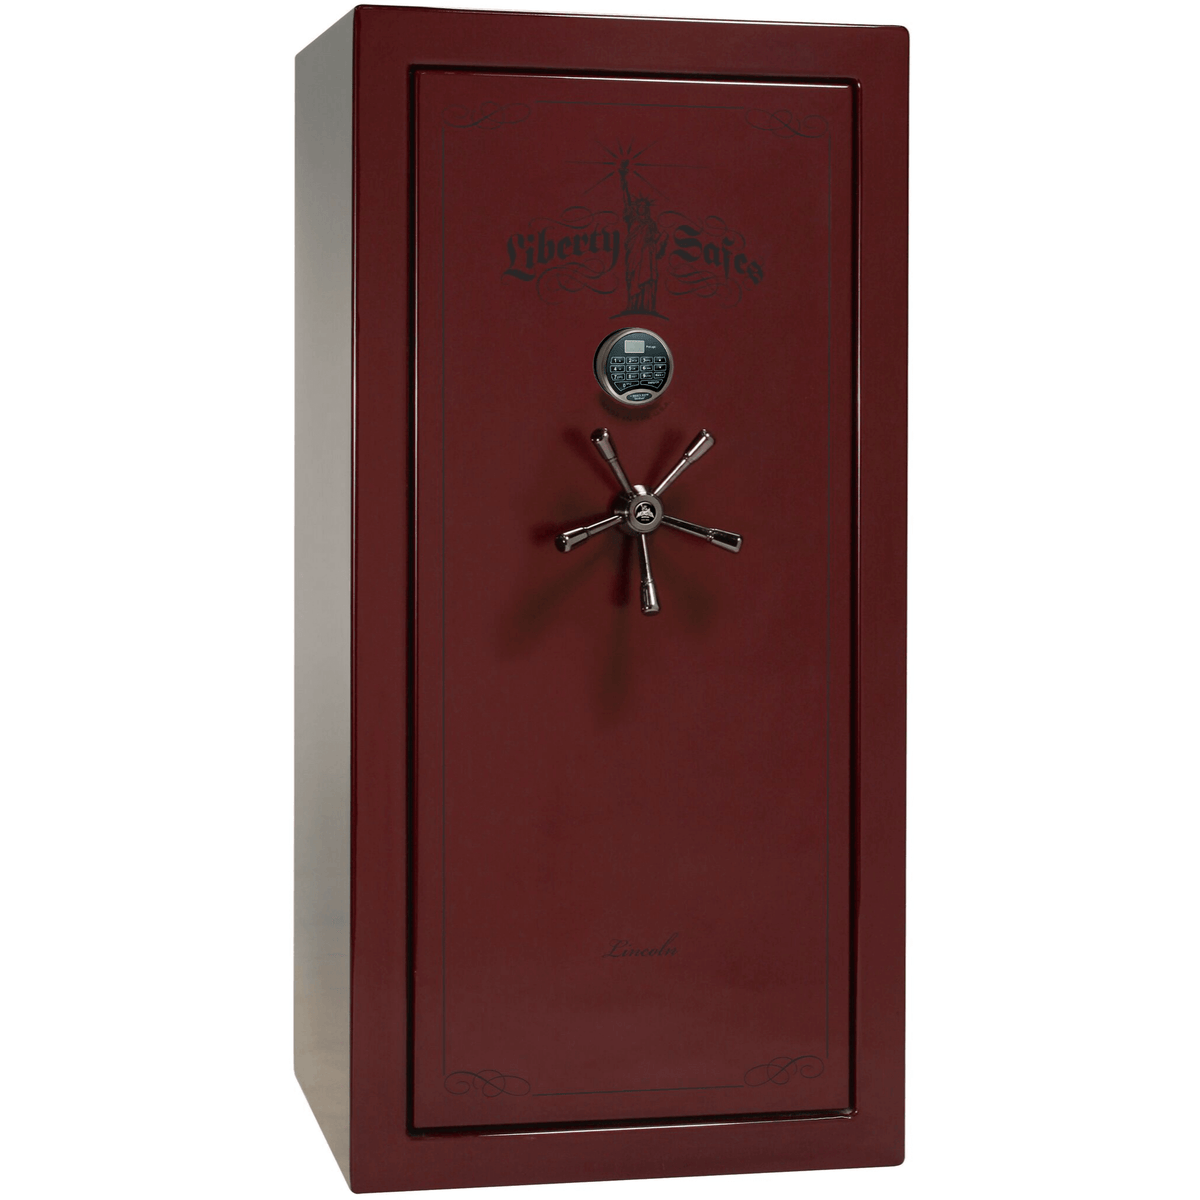 Liberty Lincoln 25 Safe in Burgundy Gloss with Black Chrome Electronic Lock.